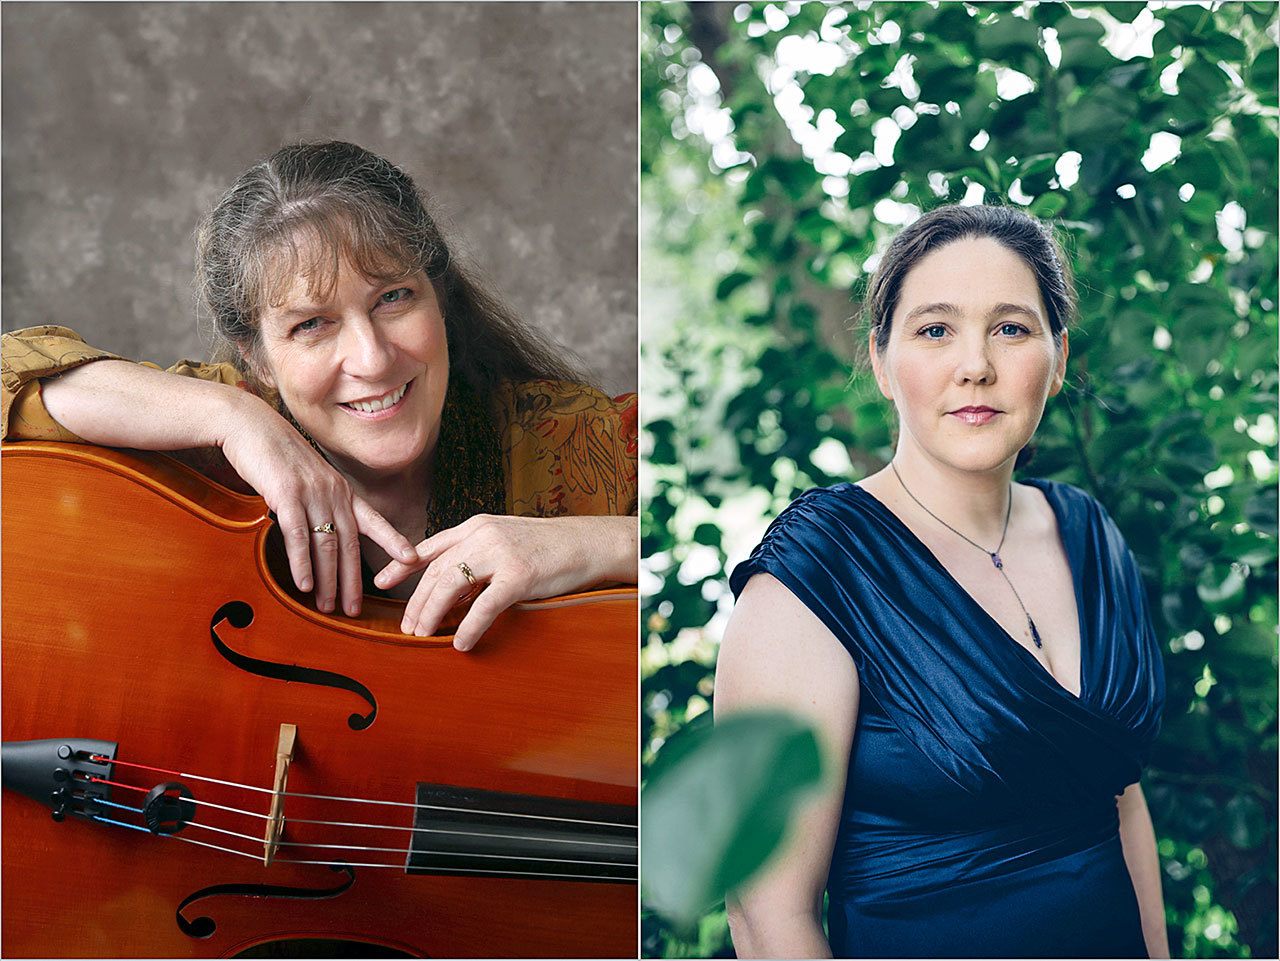 Cellist Marlene Moore, at left, and pianist Hillary Nordwell will explore the works of 19th century composers of Clara Wieck Schumann and Robert Schumann during a joint concert Saturday evening at the Port Angeles Seventh Day Adventist Church.